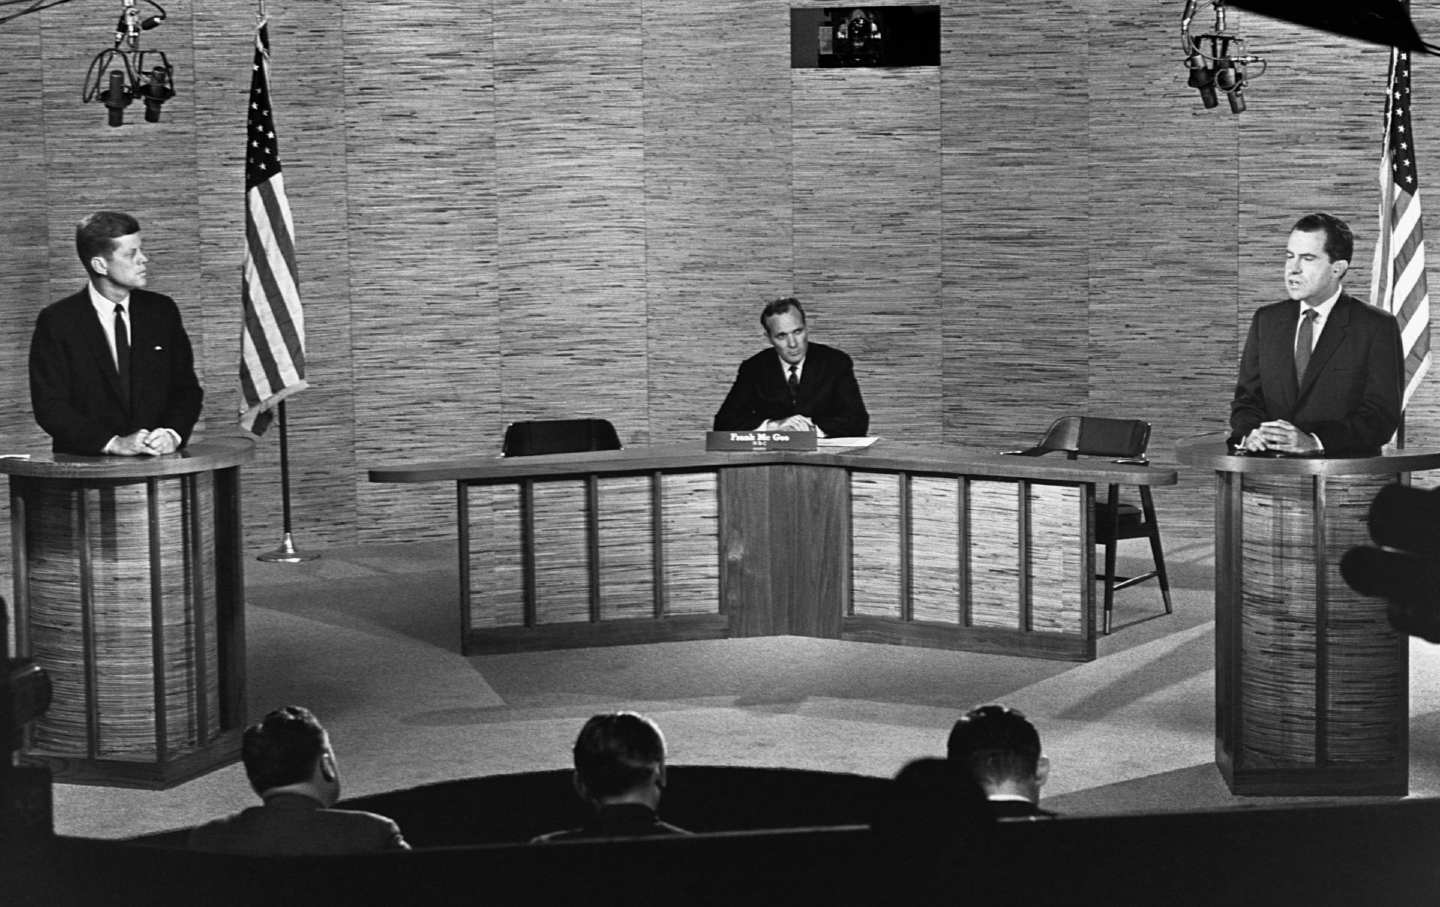 John F. Kennedy and Richard Nixon stand at podiums during one of their four debates in 1960.